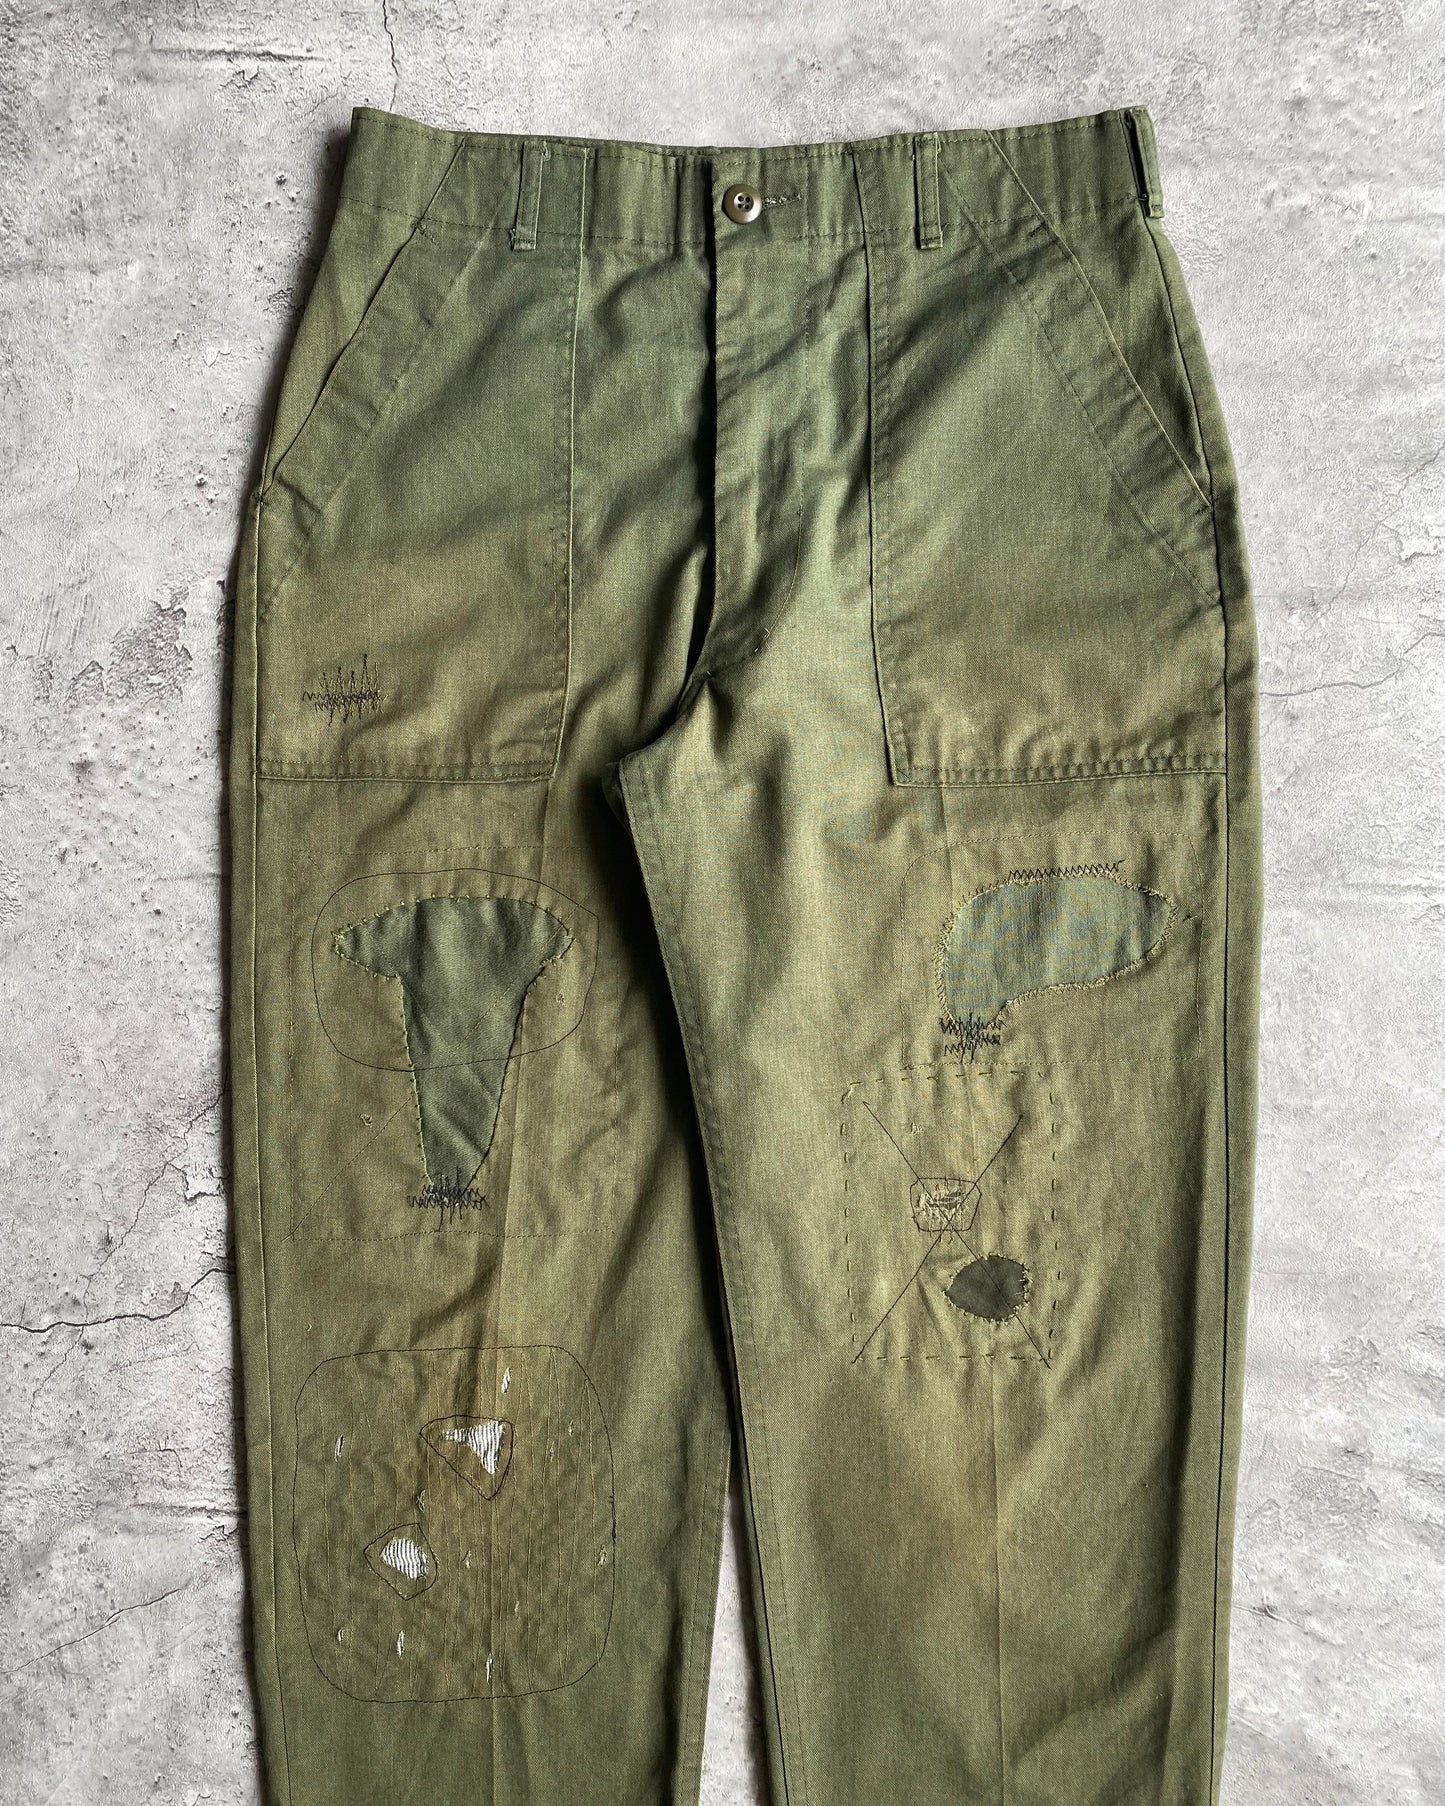 1970S PATCHED OG-507 US ARMY TROUSERS (32X29)